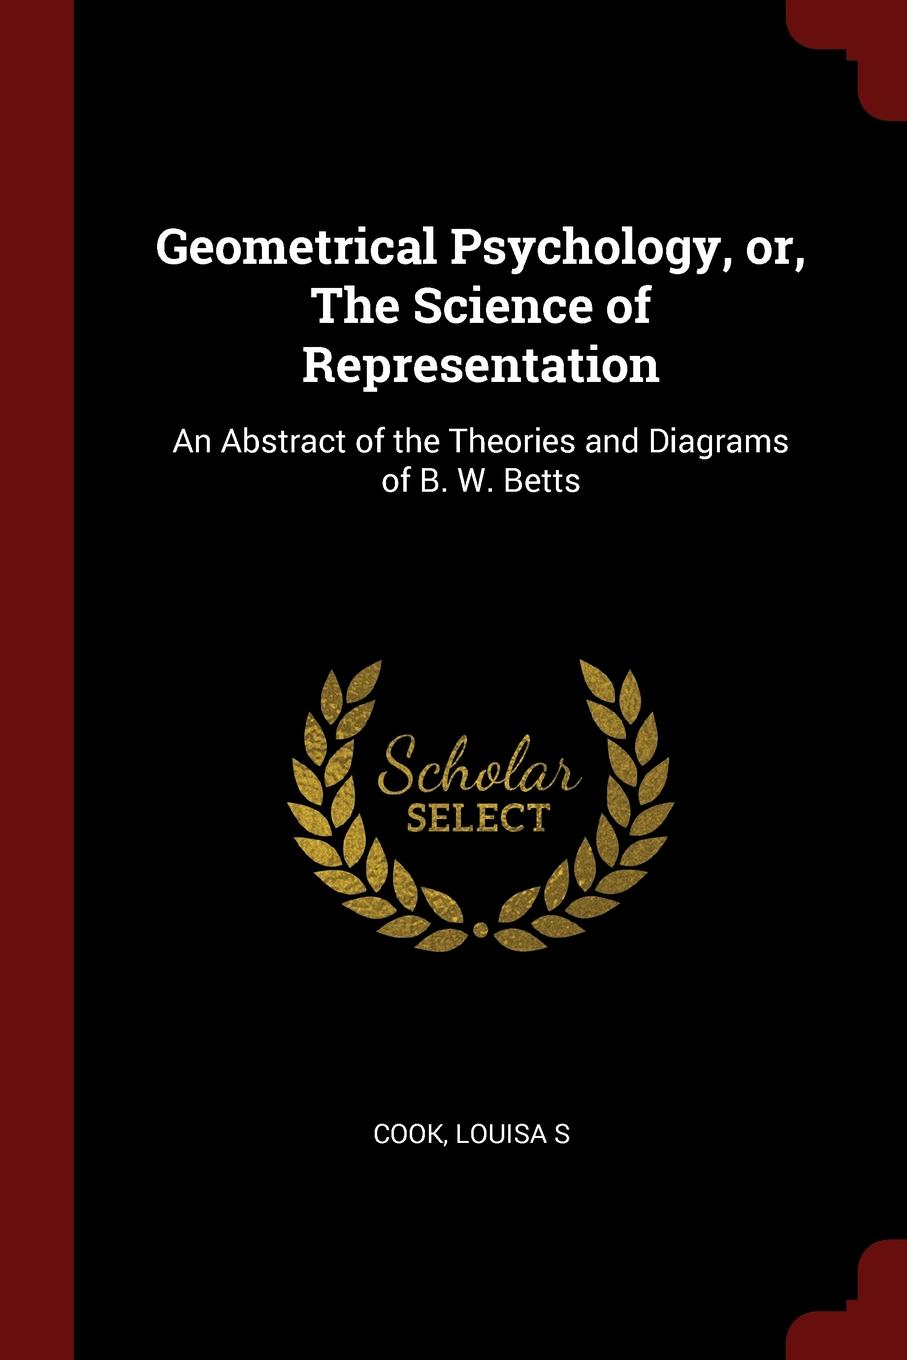 Geometrical Psychology, or, The Science of Representation. An Abstract of the Theories and Diagrams of B. W. Betts